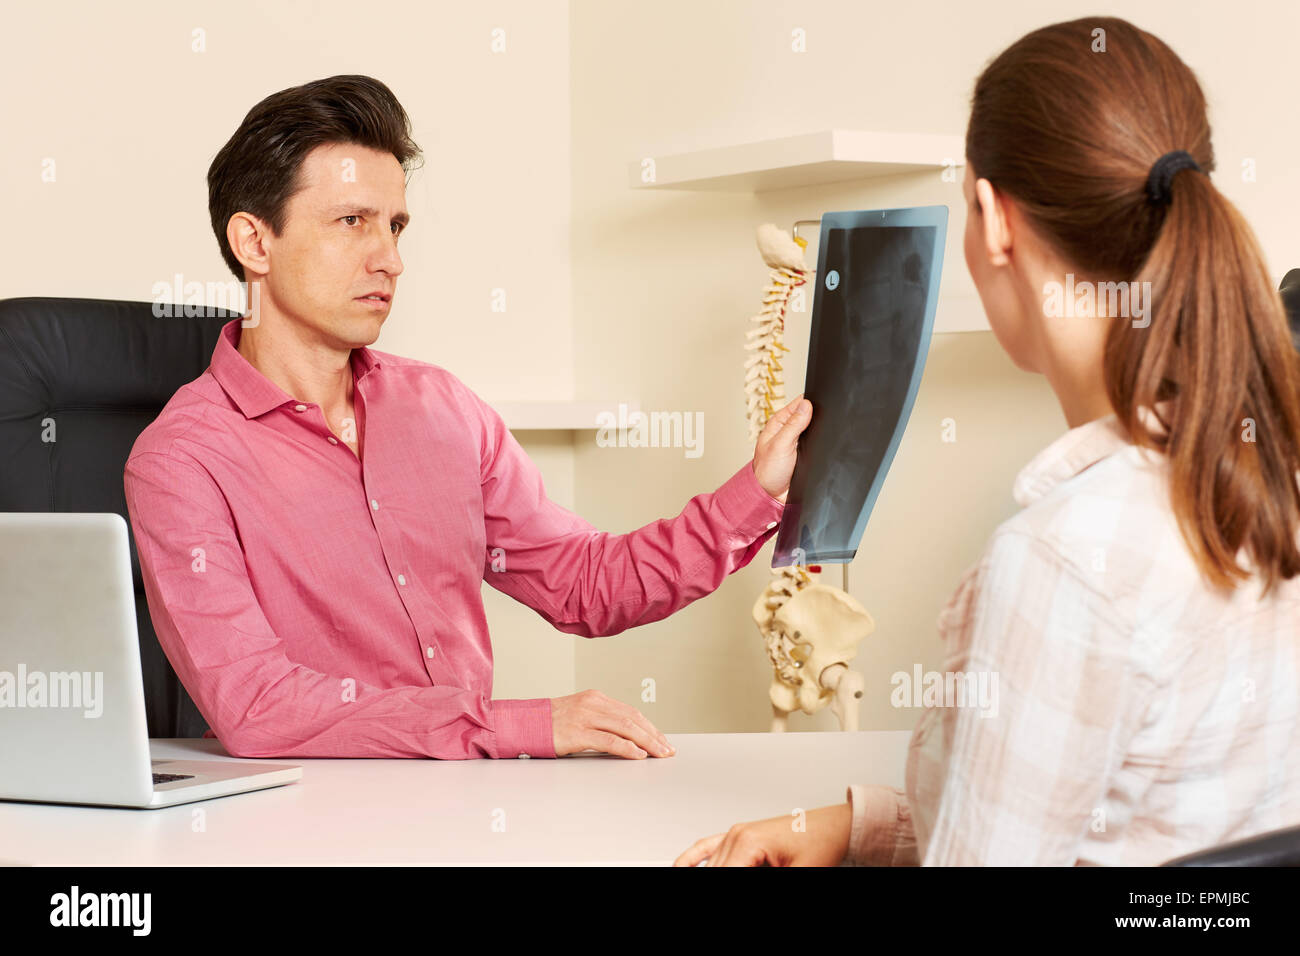 Orthopedic surgeon with a patient in treatment. Stock Photo